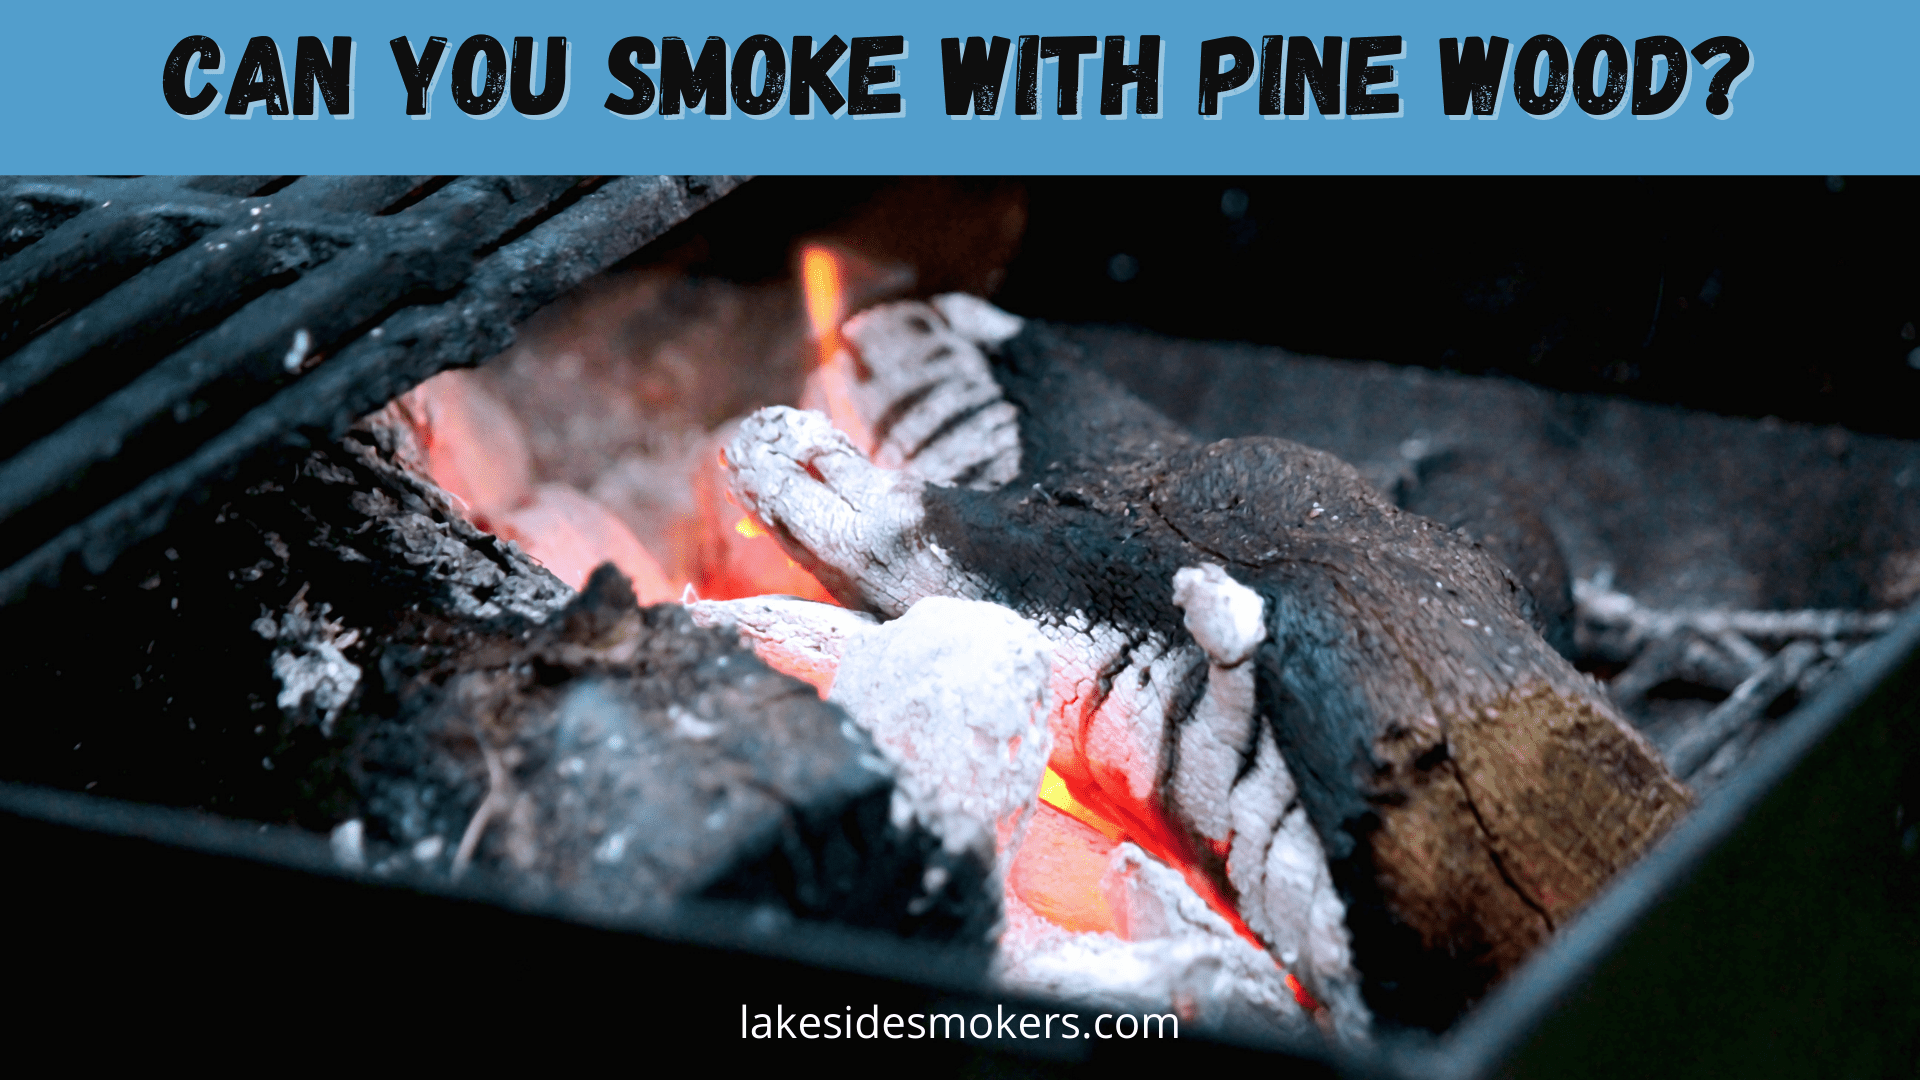 Can you smoke with pine wood? This is why it's not a good idea